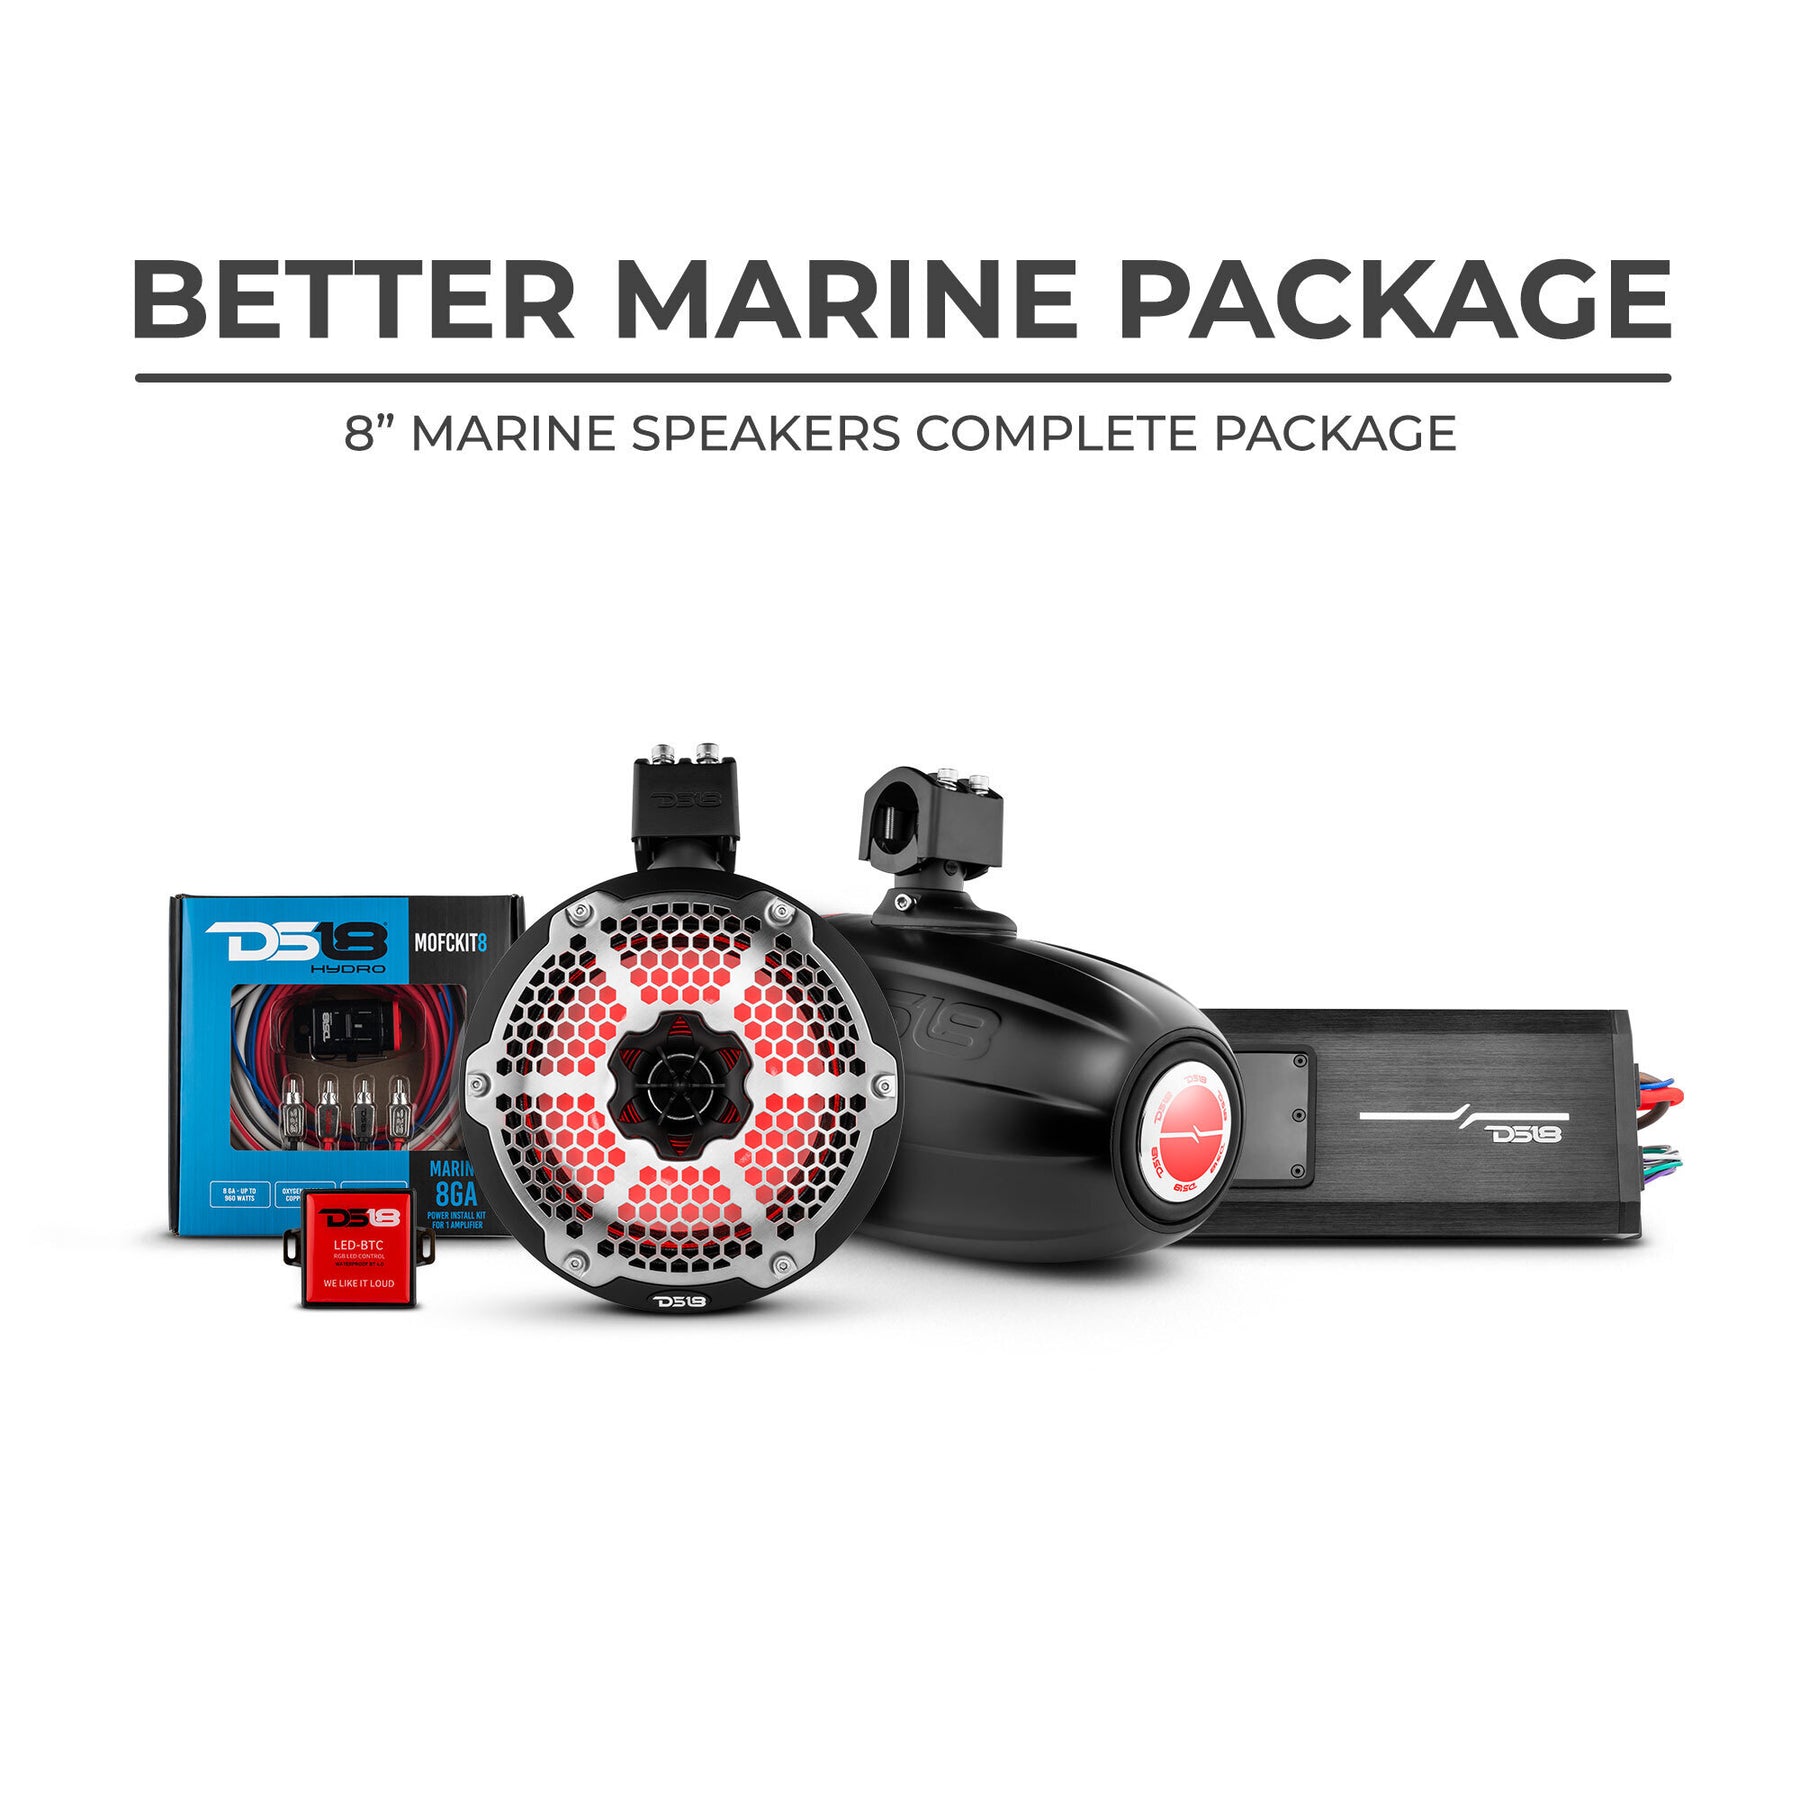 DS18 Better Marine Stereo Package 2 x 8” Speaker Tower | 1 x 2 Ch Amplifier | 1 x MOFCKIT8 and 1 x LED-BTC